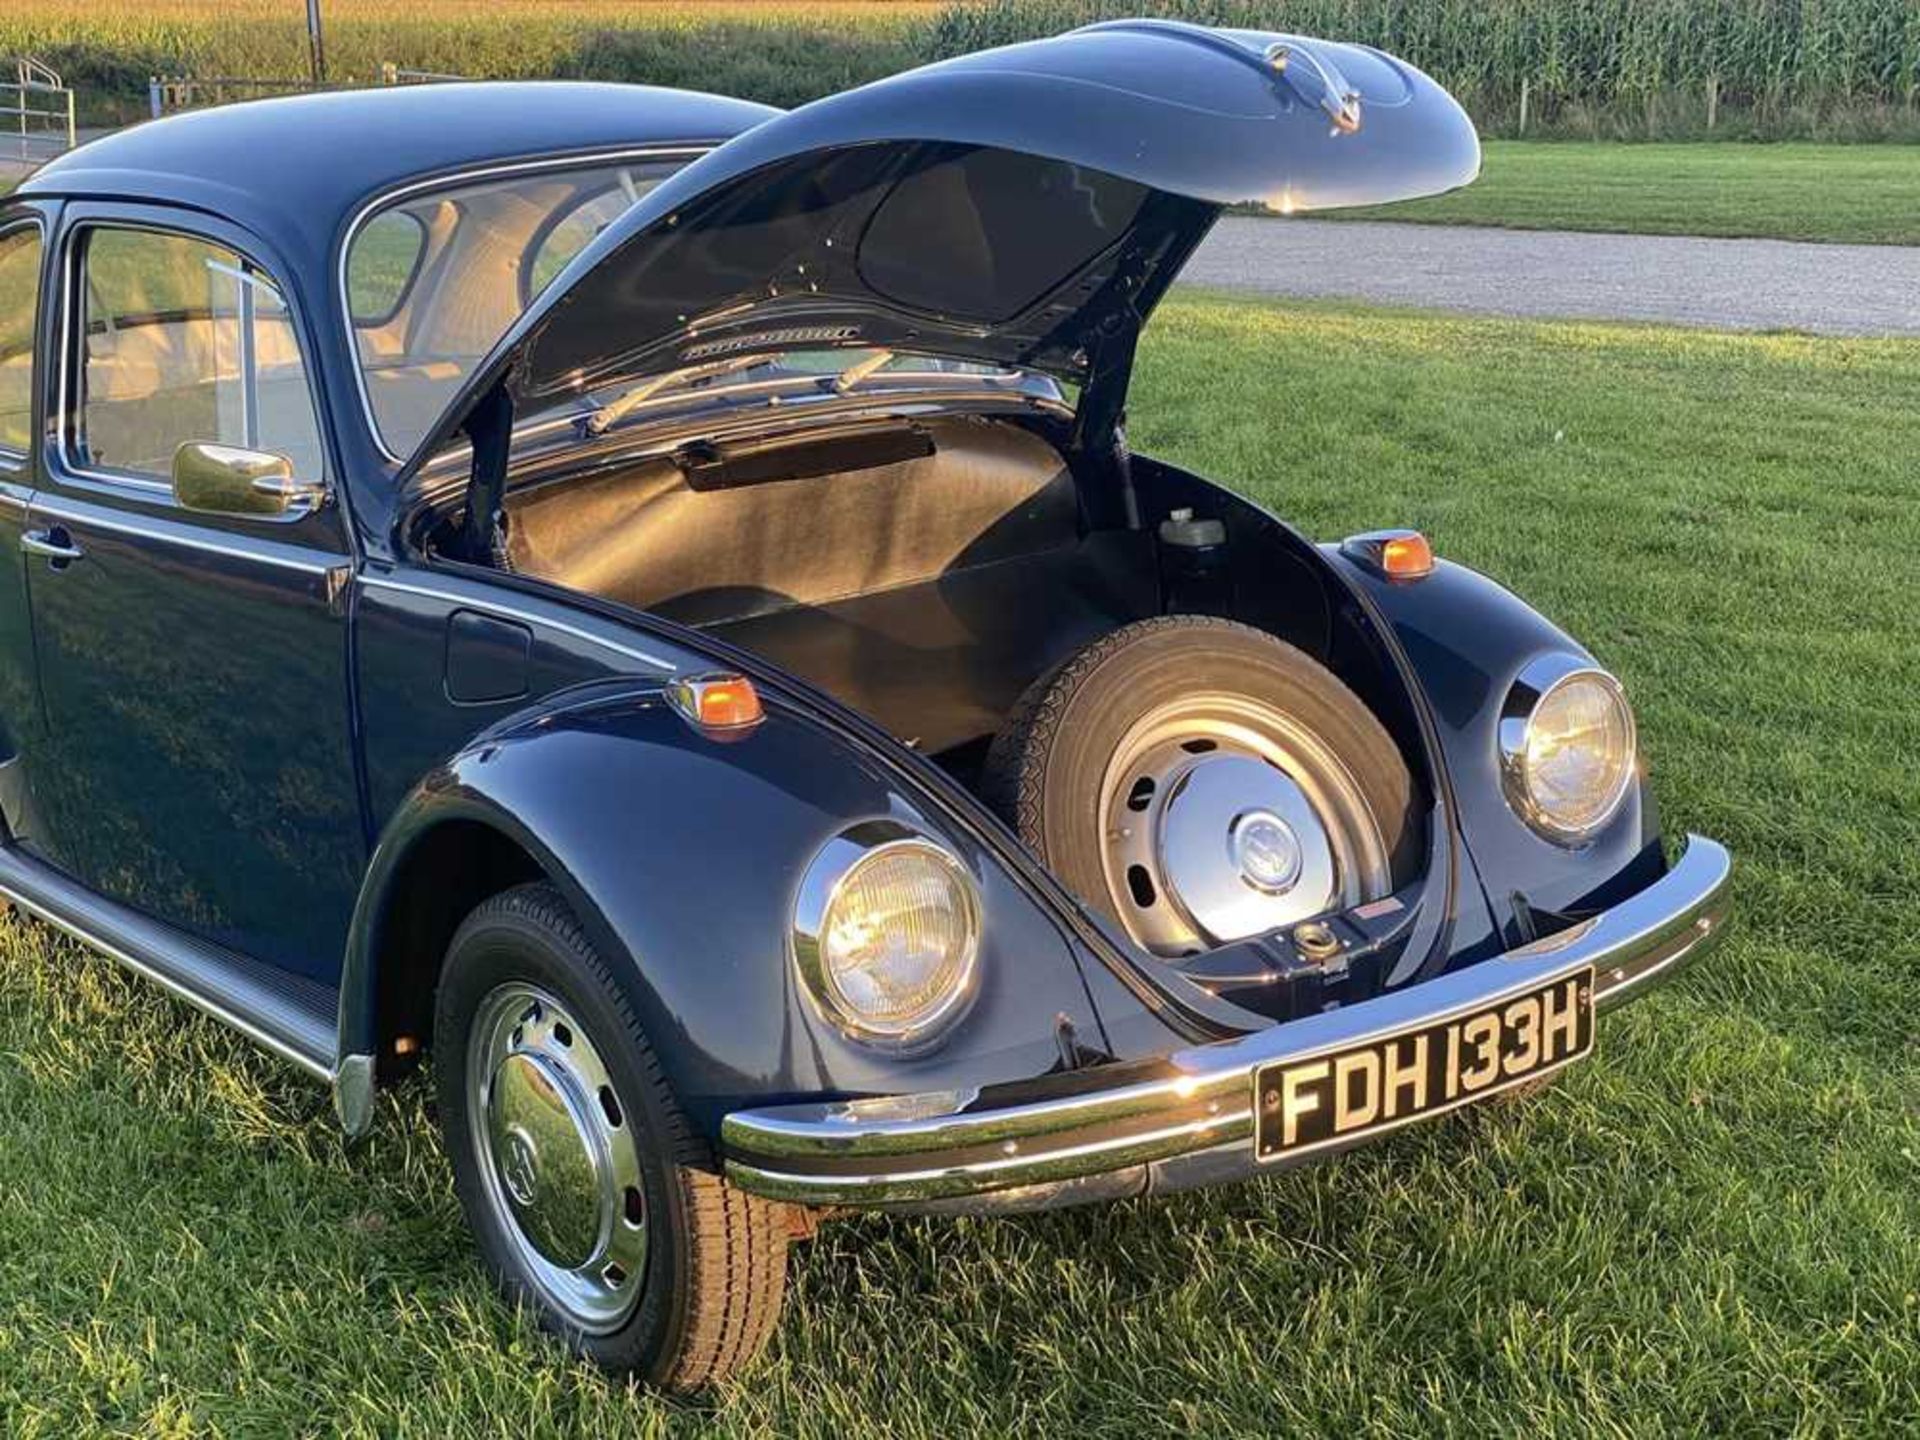 1970 VW Beetle 1300 Semi-Auto A very original example, suitable for a collector - Image 17 of 56